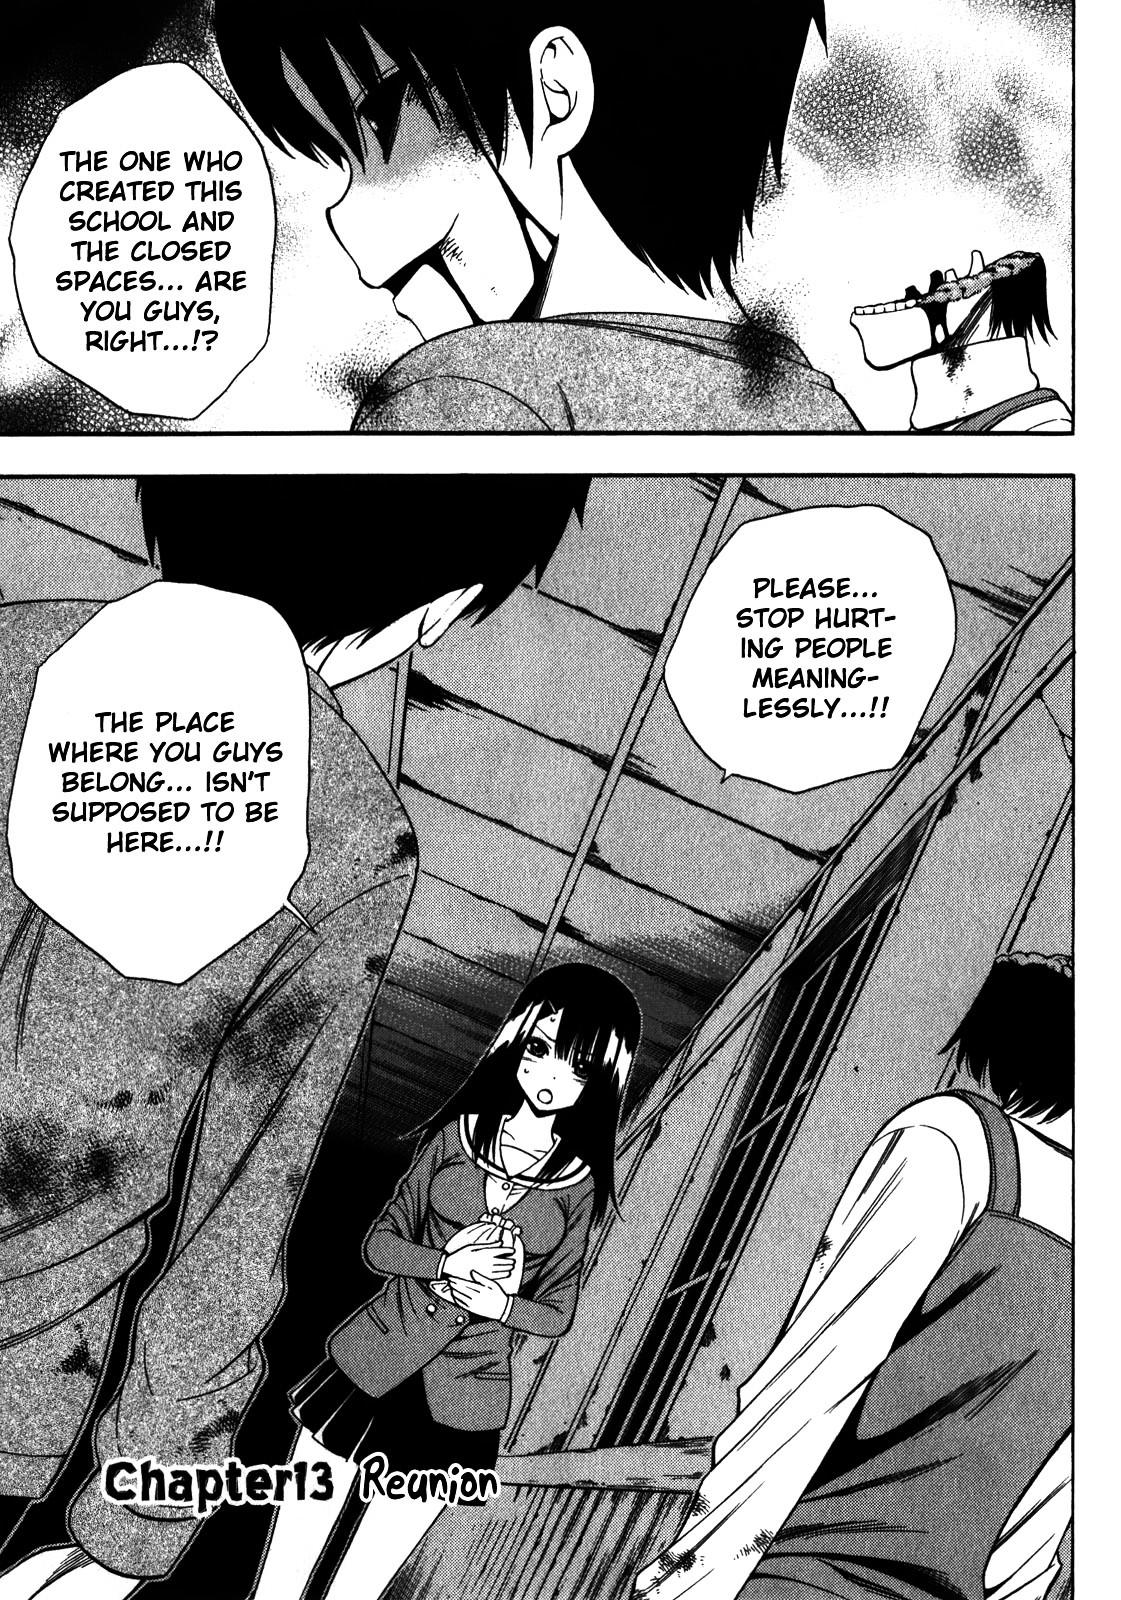 Corpse Party Another Child Vol 3 Chapter 13 Reunion Mangakakalots Com